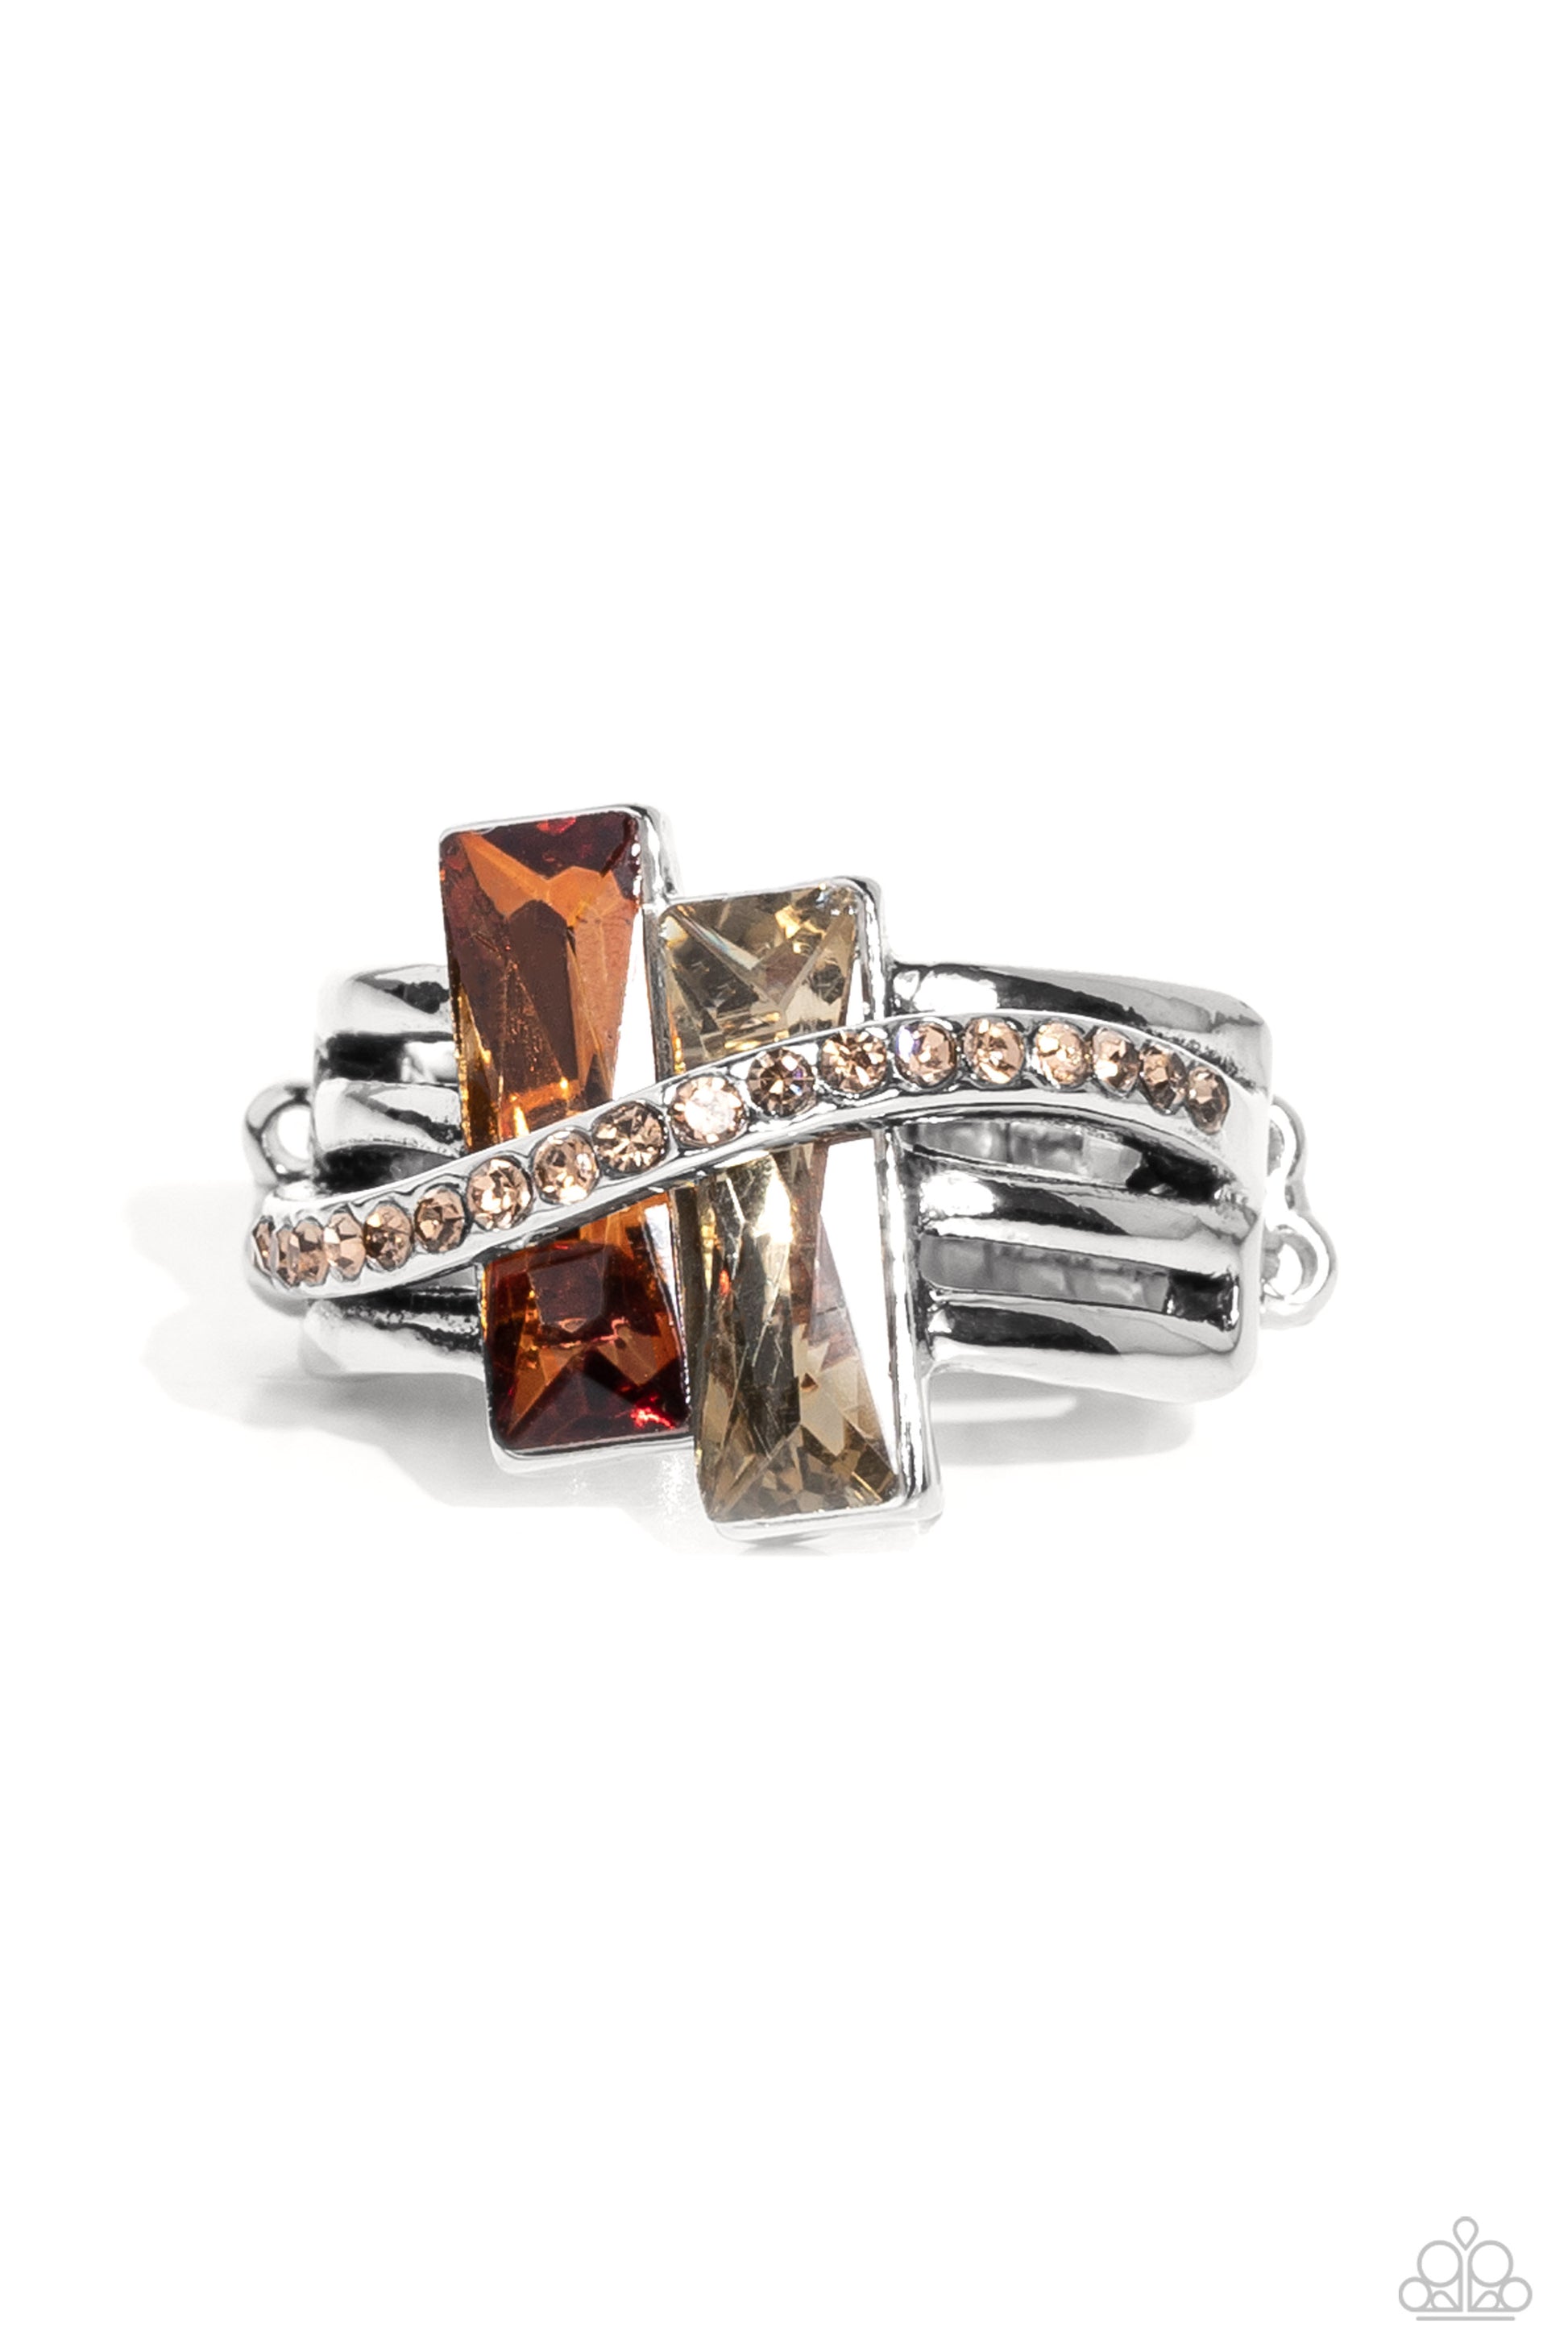 Paparazzi Accessories - Dueling Difference - Brown Ring nestled in the center of three linear silver bars, two emerald-cut bars, one a glassy topaz gem, the other a glassy light-colored topaz gem, slant across the finger for a gritty display. A thin bar of silver, encrusted with dainty light-colored topaz rhinestones, curves up and over the slanted emerald-cut bars for additional shimmer and structure atop the finger. Features a dainty stretchy band for a flexible fit. Sold as one individual ring.